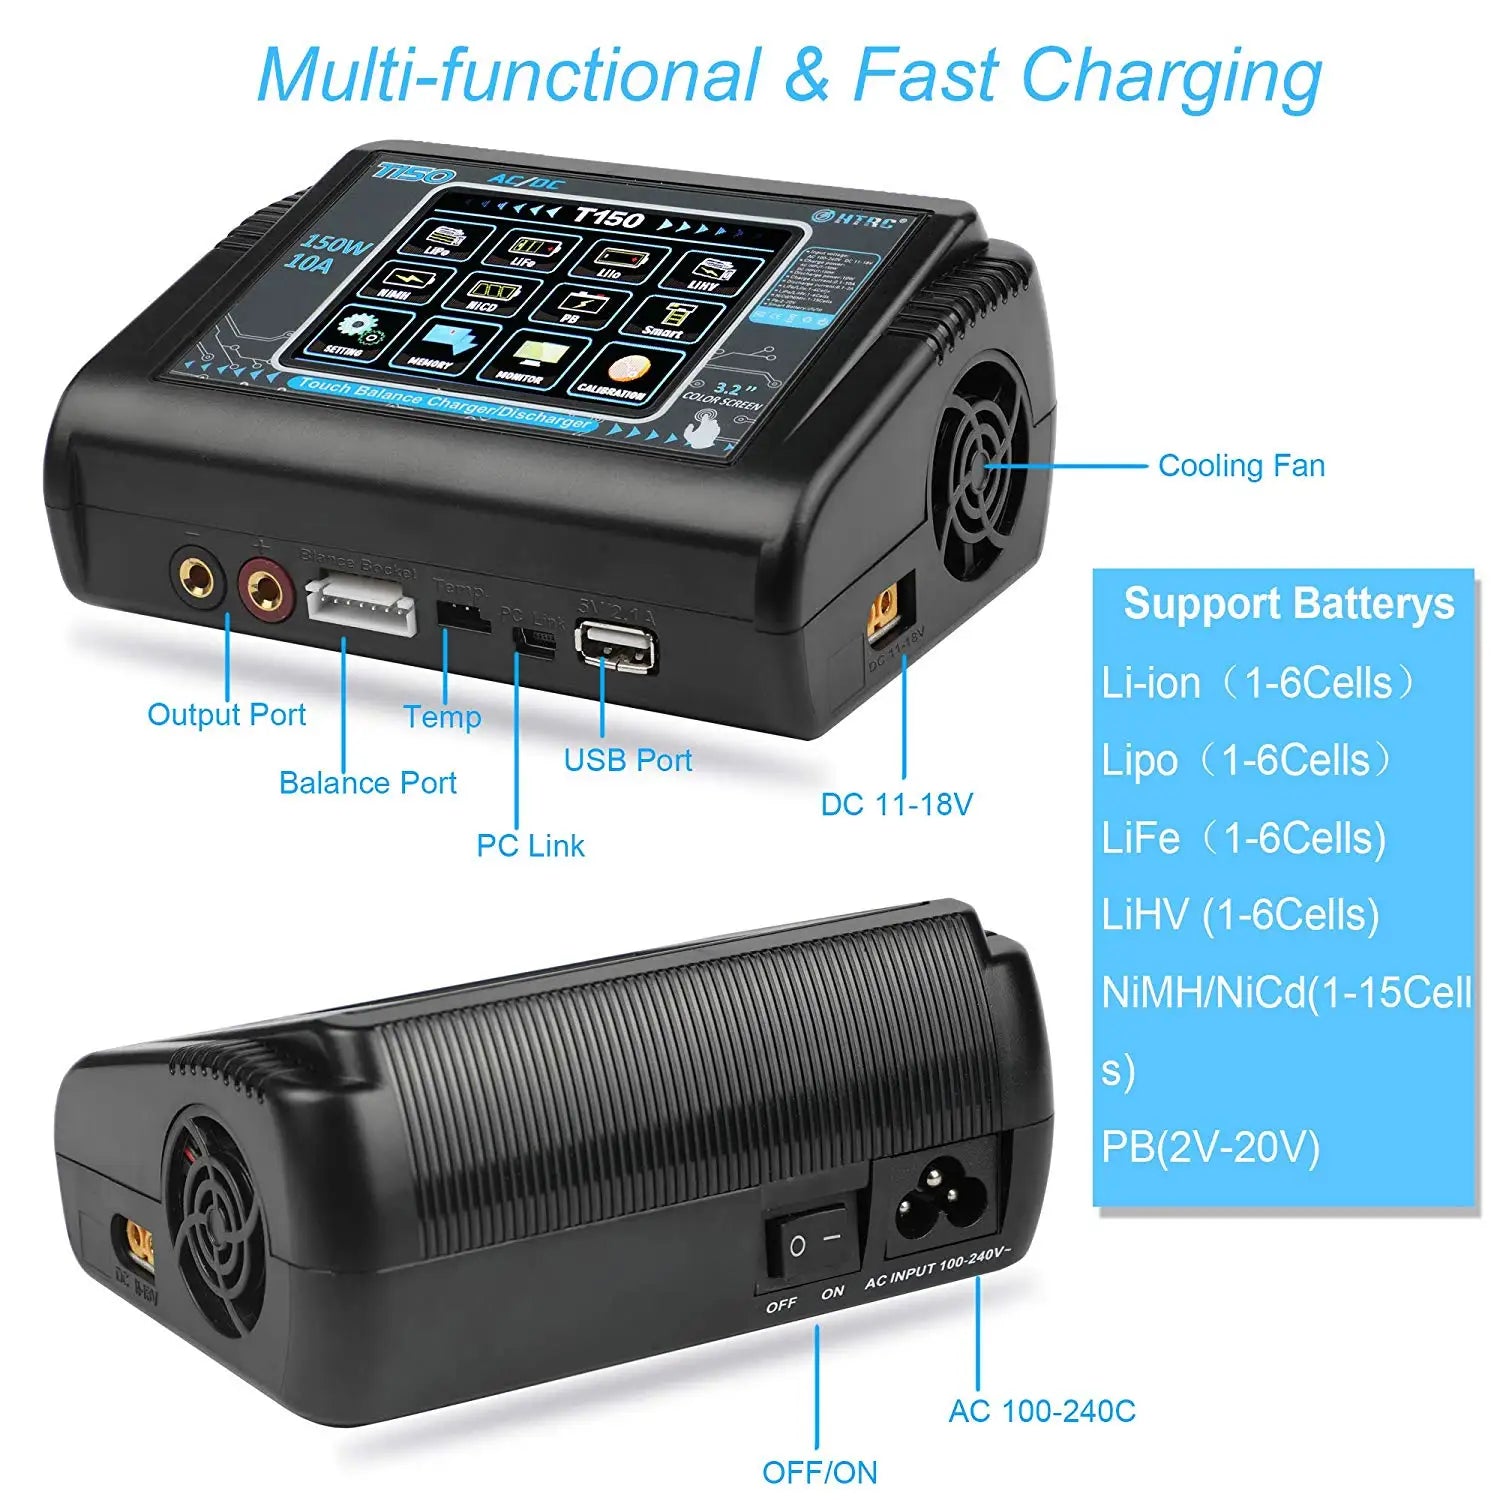 HTRC T240 Duo Lipo Charger, Multi-functional & Fast Charging 32/05 1750 11 _ Hlo